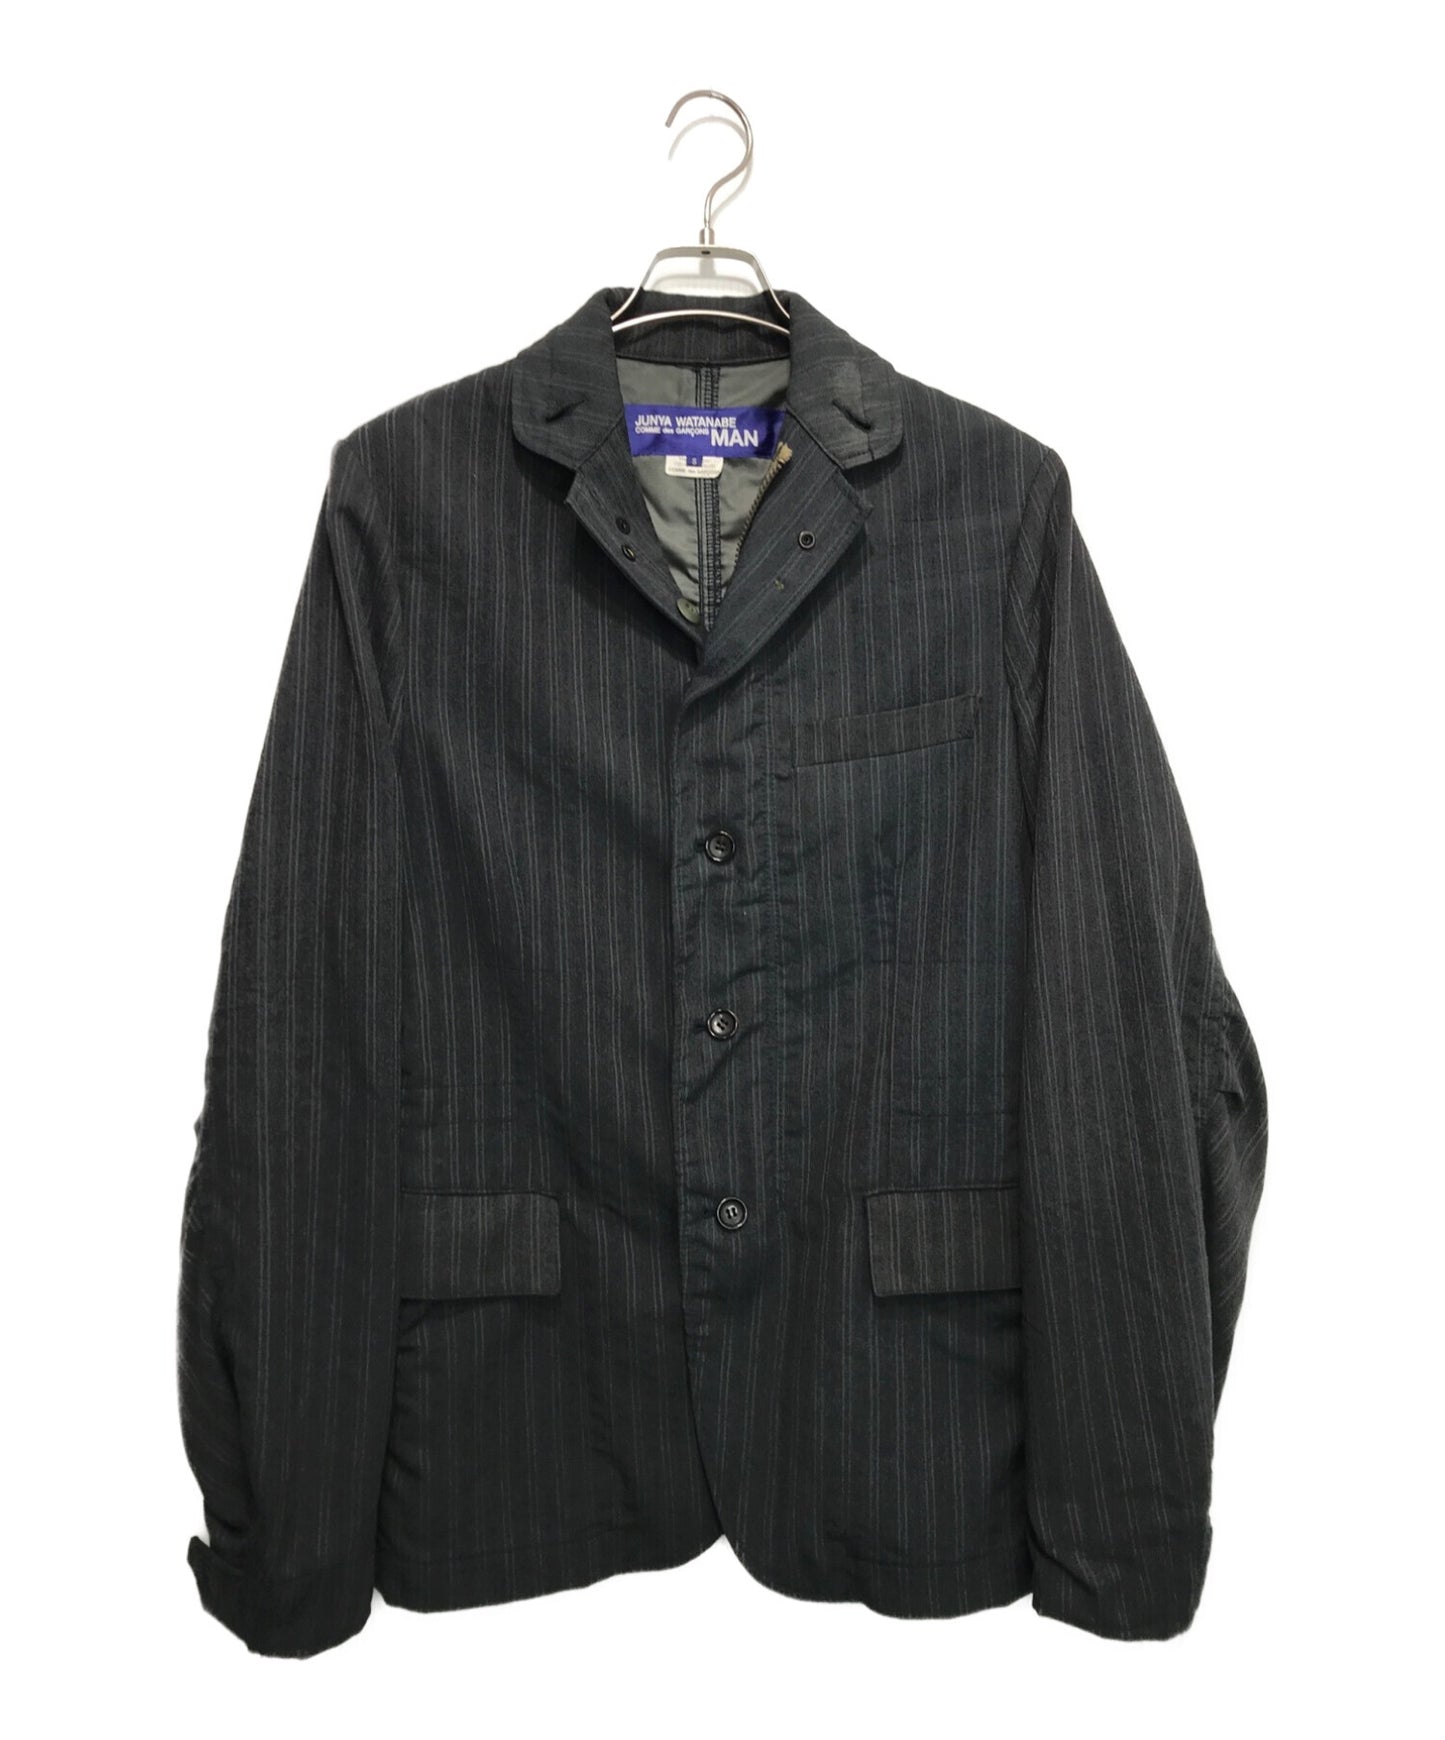 COMME des GARCONS JUNYA WATANABE MAN MA1 Reconstructed Tailored Jacket WR-J018